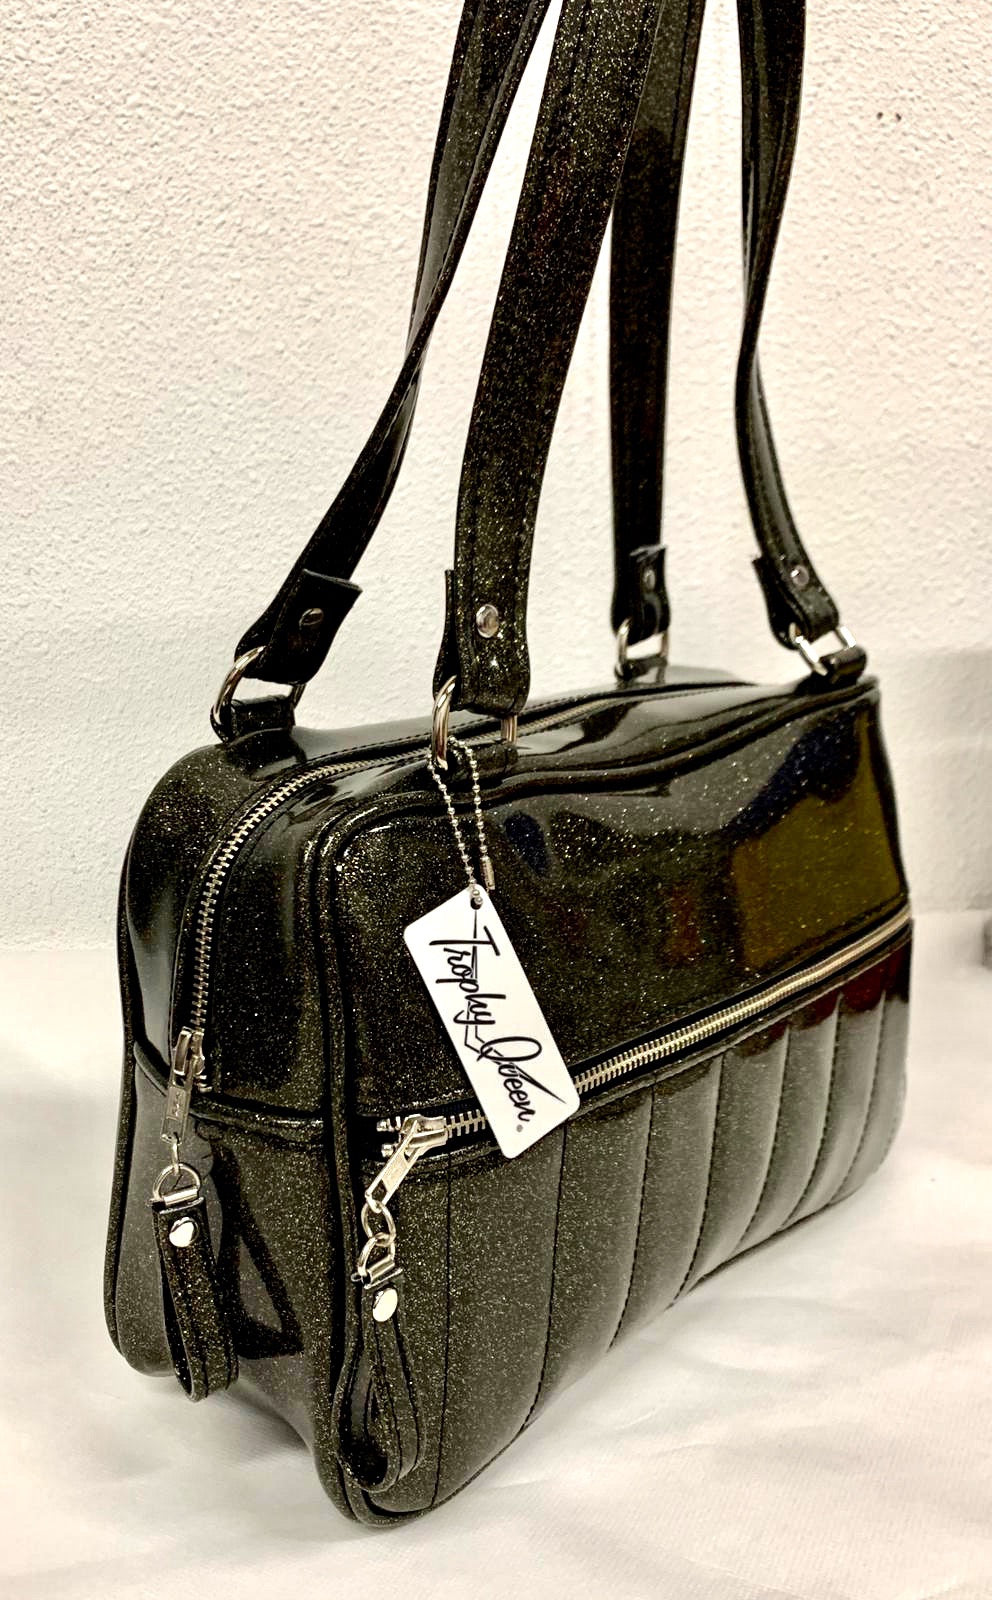 Fairlane Tote Bag in glitter gold speckled black vinyl with plush Leopard Lining. This purse has matching vinyl zipper pull, nickel feet, inside zipper pocket with serial number and open divided pocket with signature Trophy Queen label. The straps are approximately 25” and come with an extra set of replacement straps. Locally made and ships from California.